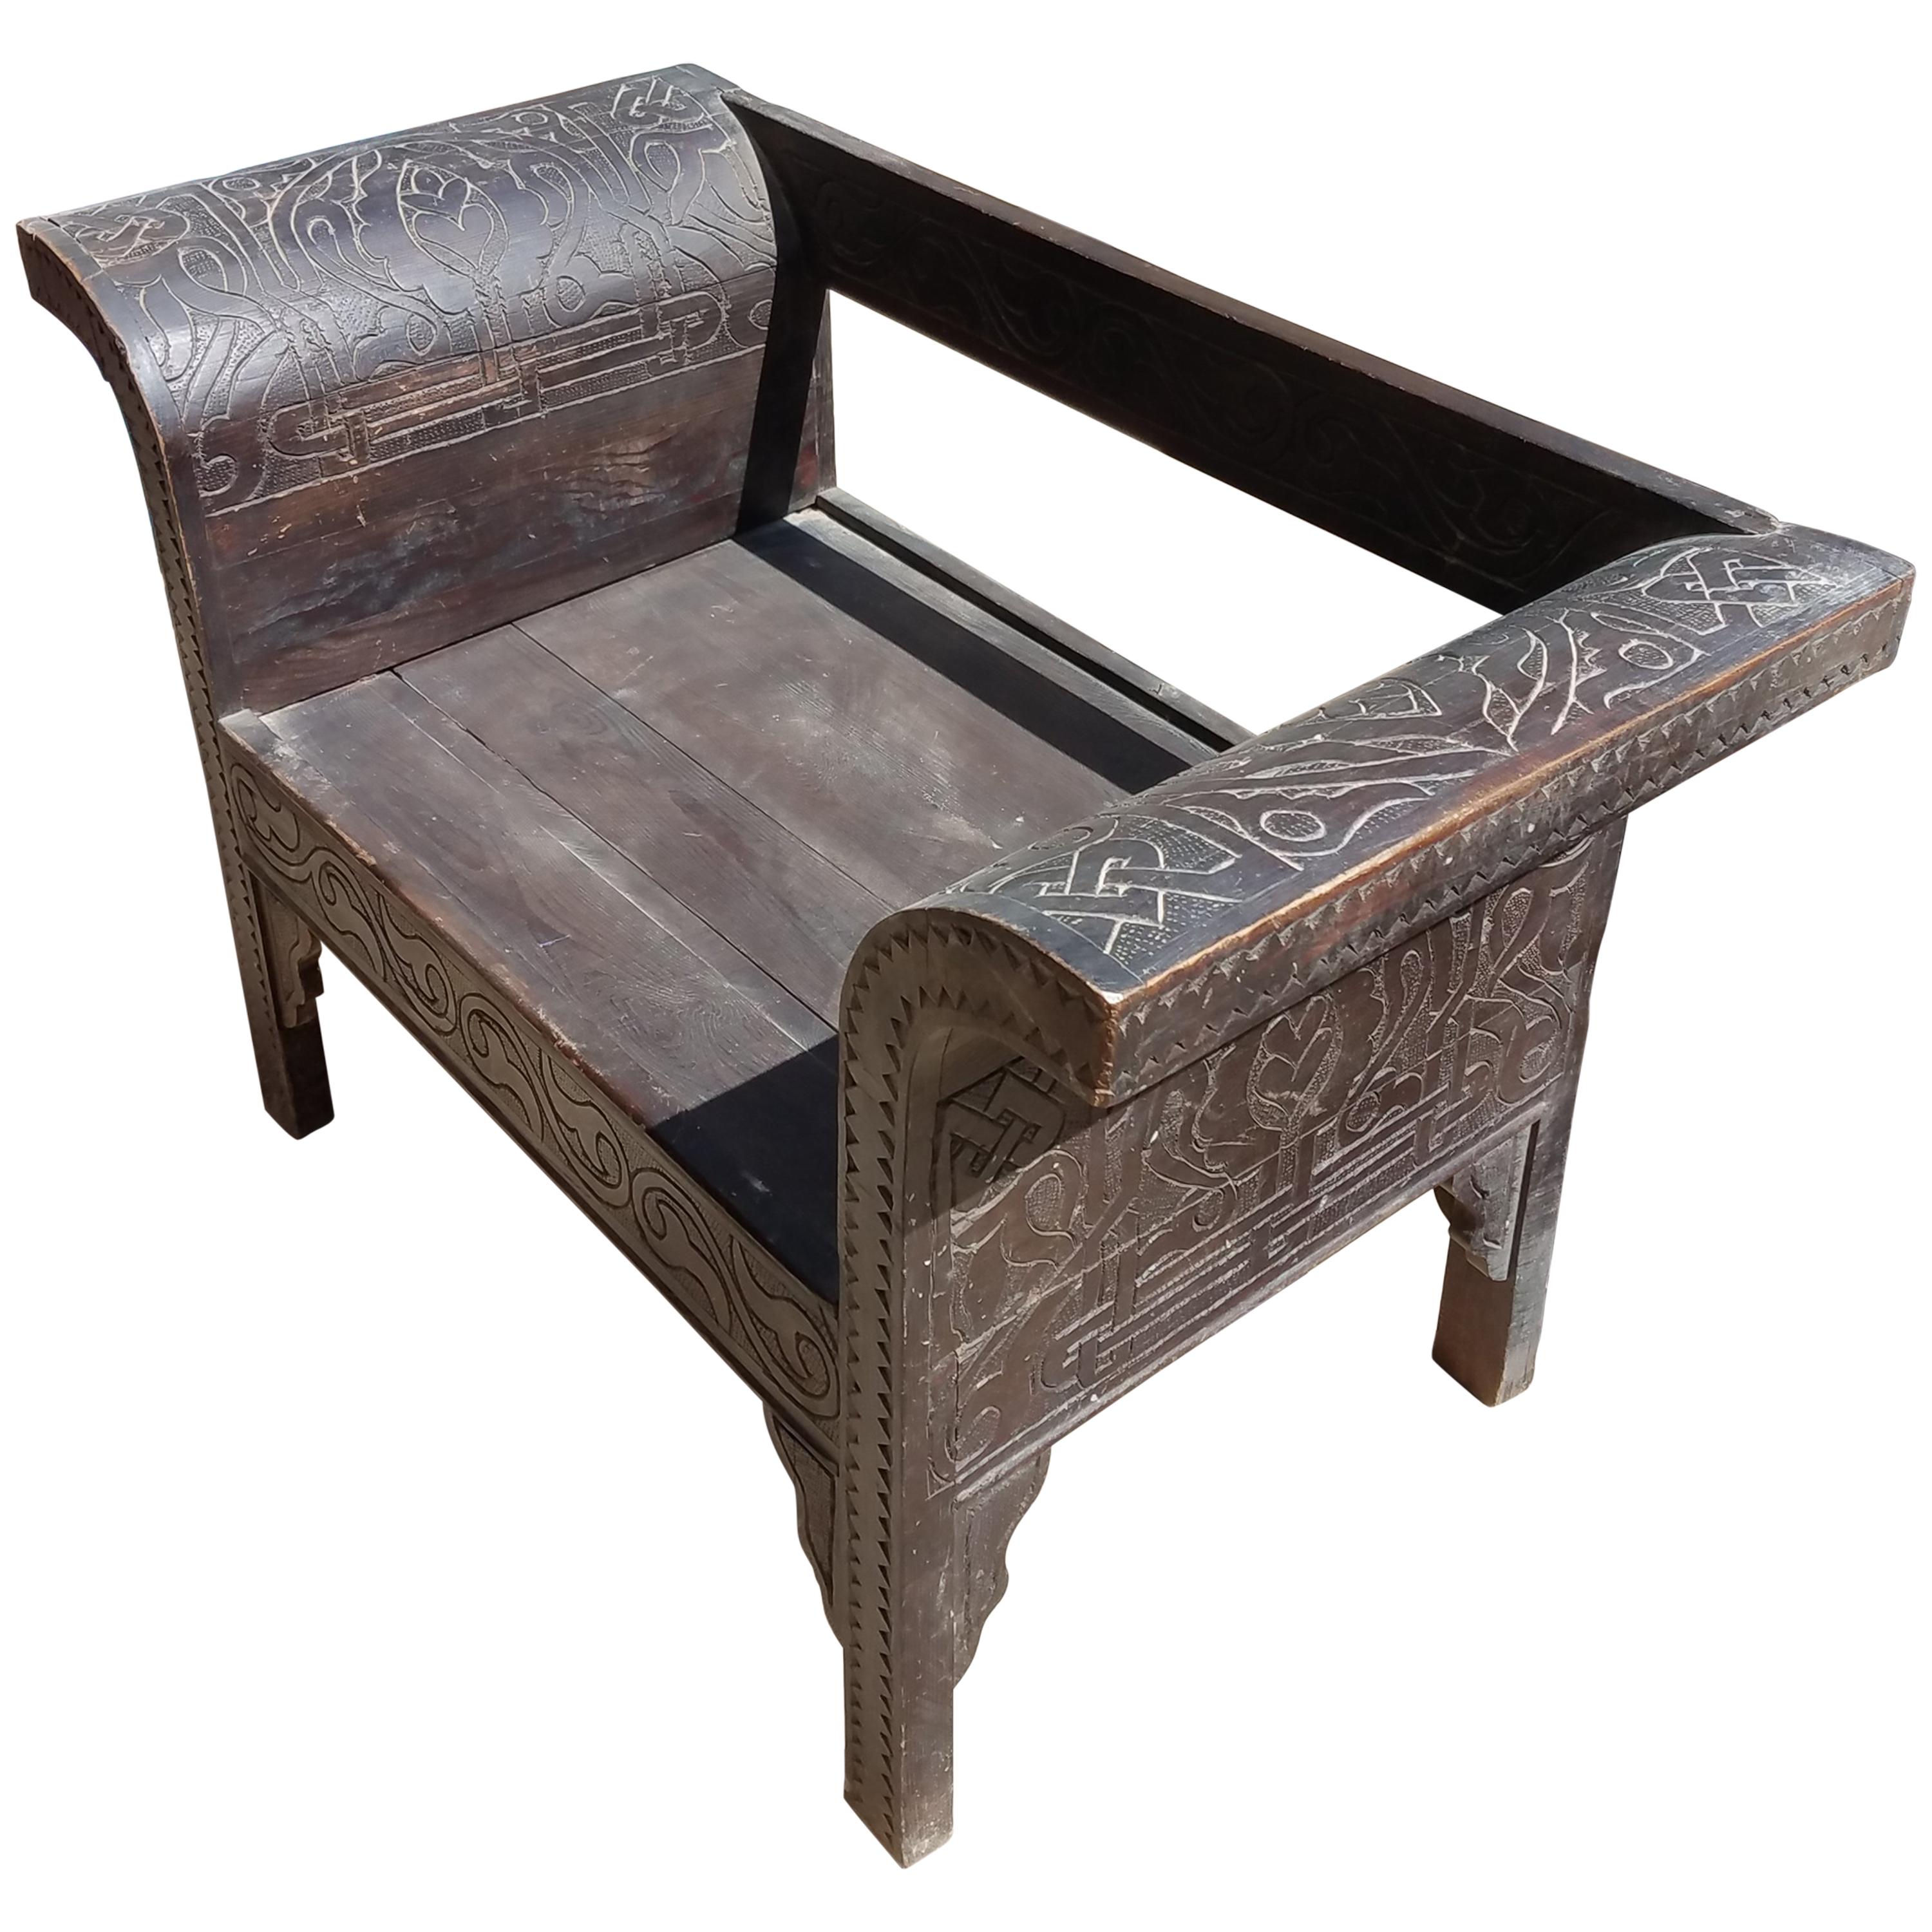 Moroccan Hand-Carved Cedar Wooden Bench for One For Sale